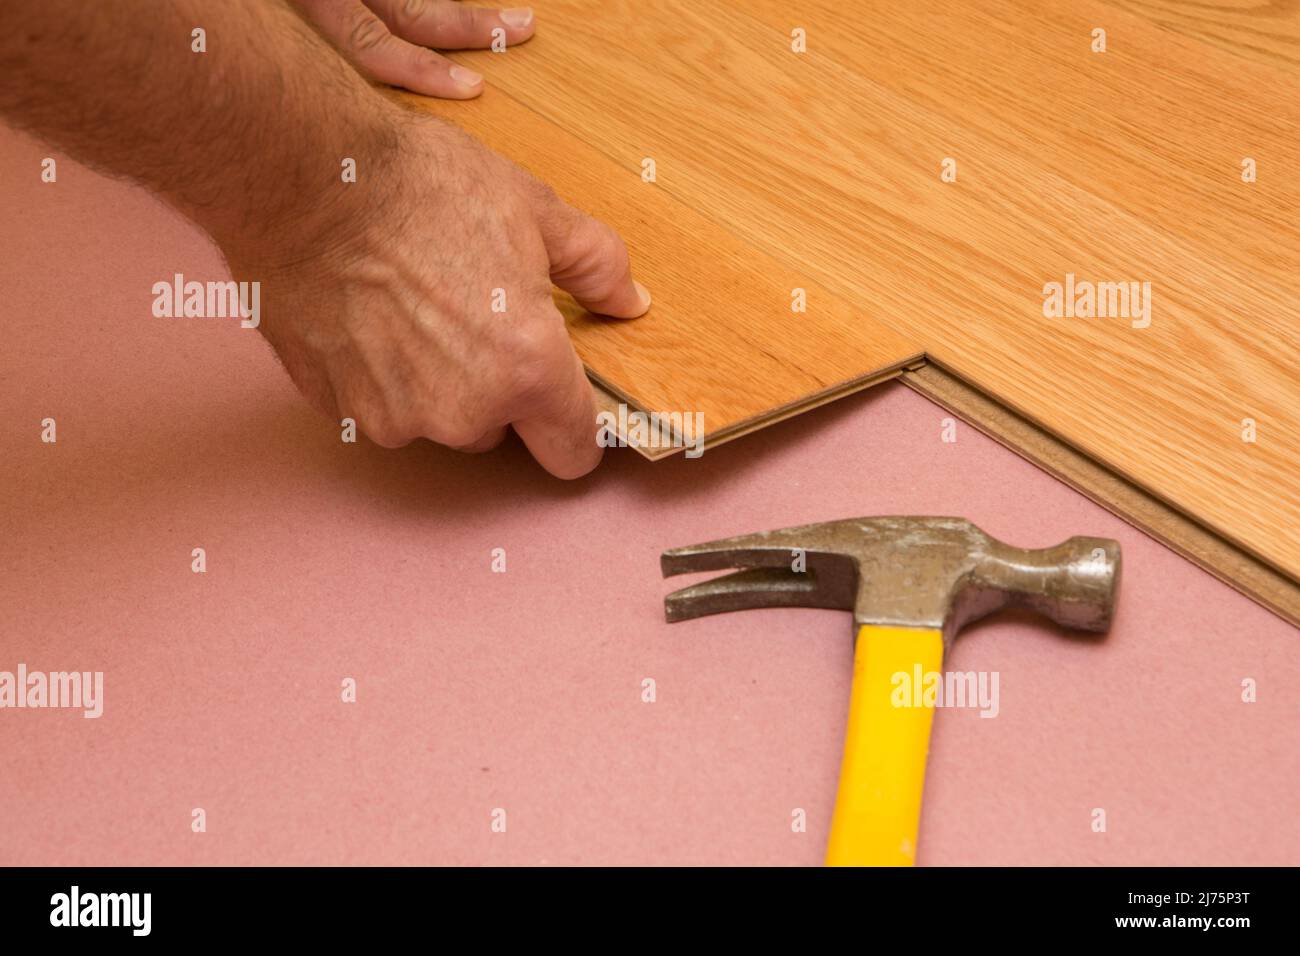 Series of shots of engineered hardwood floor being installed by a worker over pink felt paper using hand tools Stock Photo